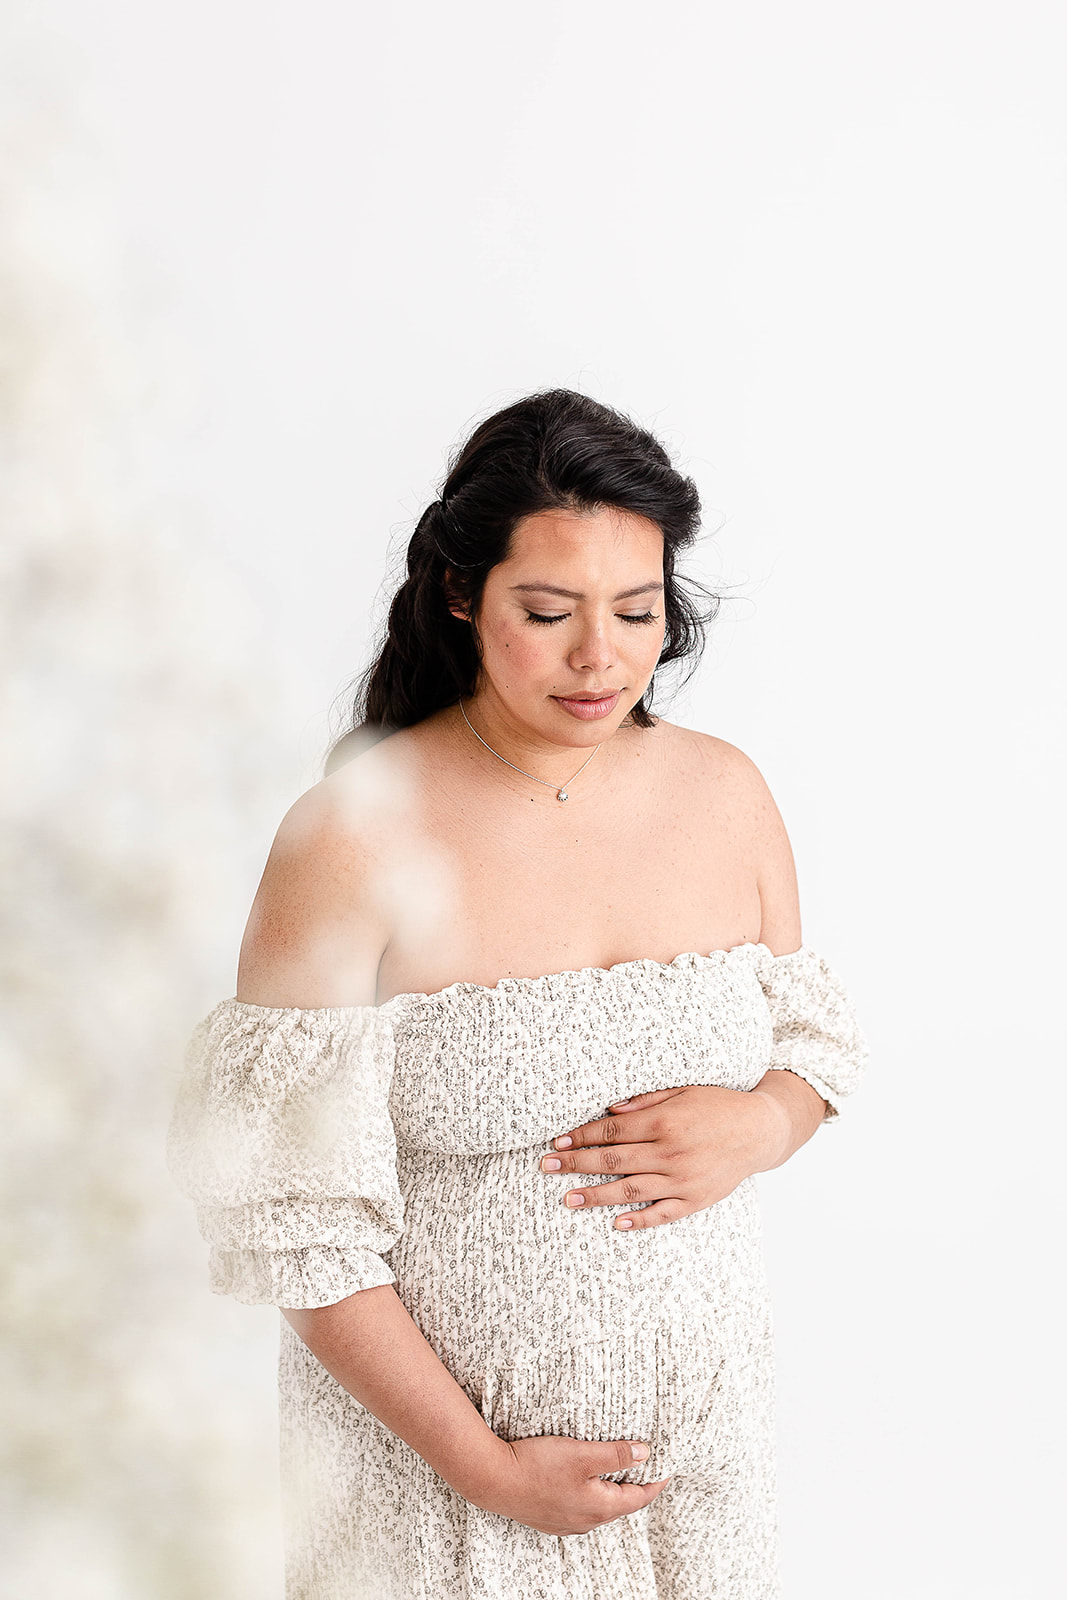 A mom to be stands in a studio smiling down to her bump in a white patterned dress before calling a Portland Lactation Consultant